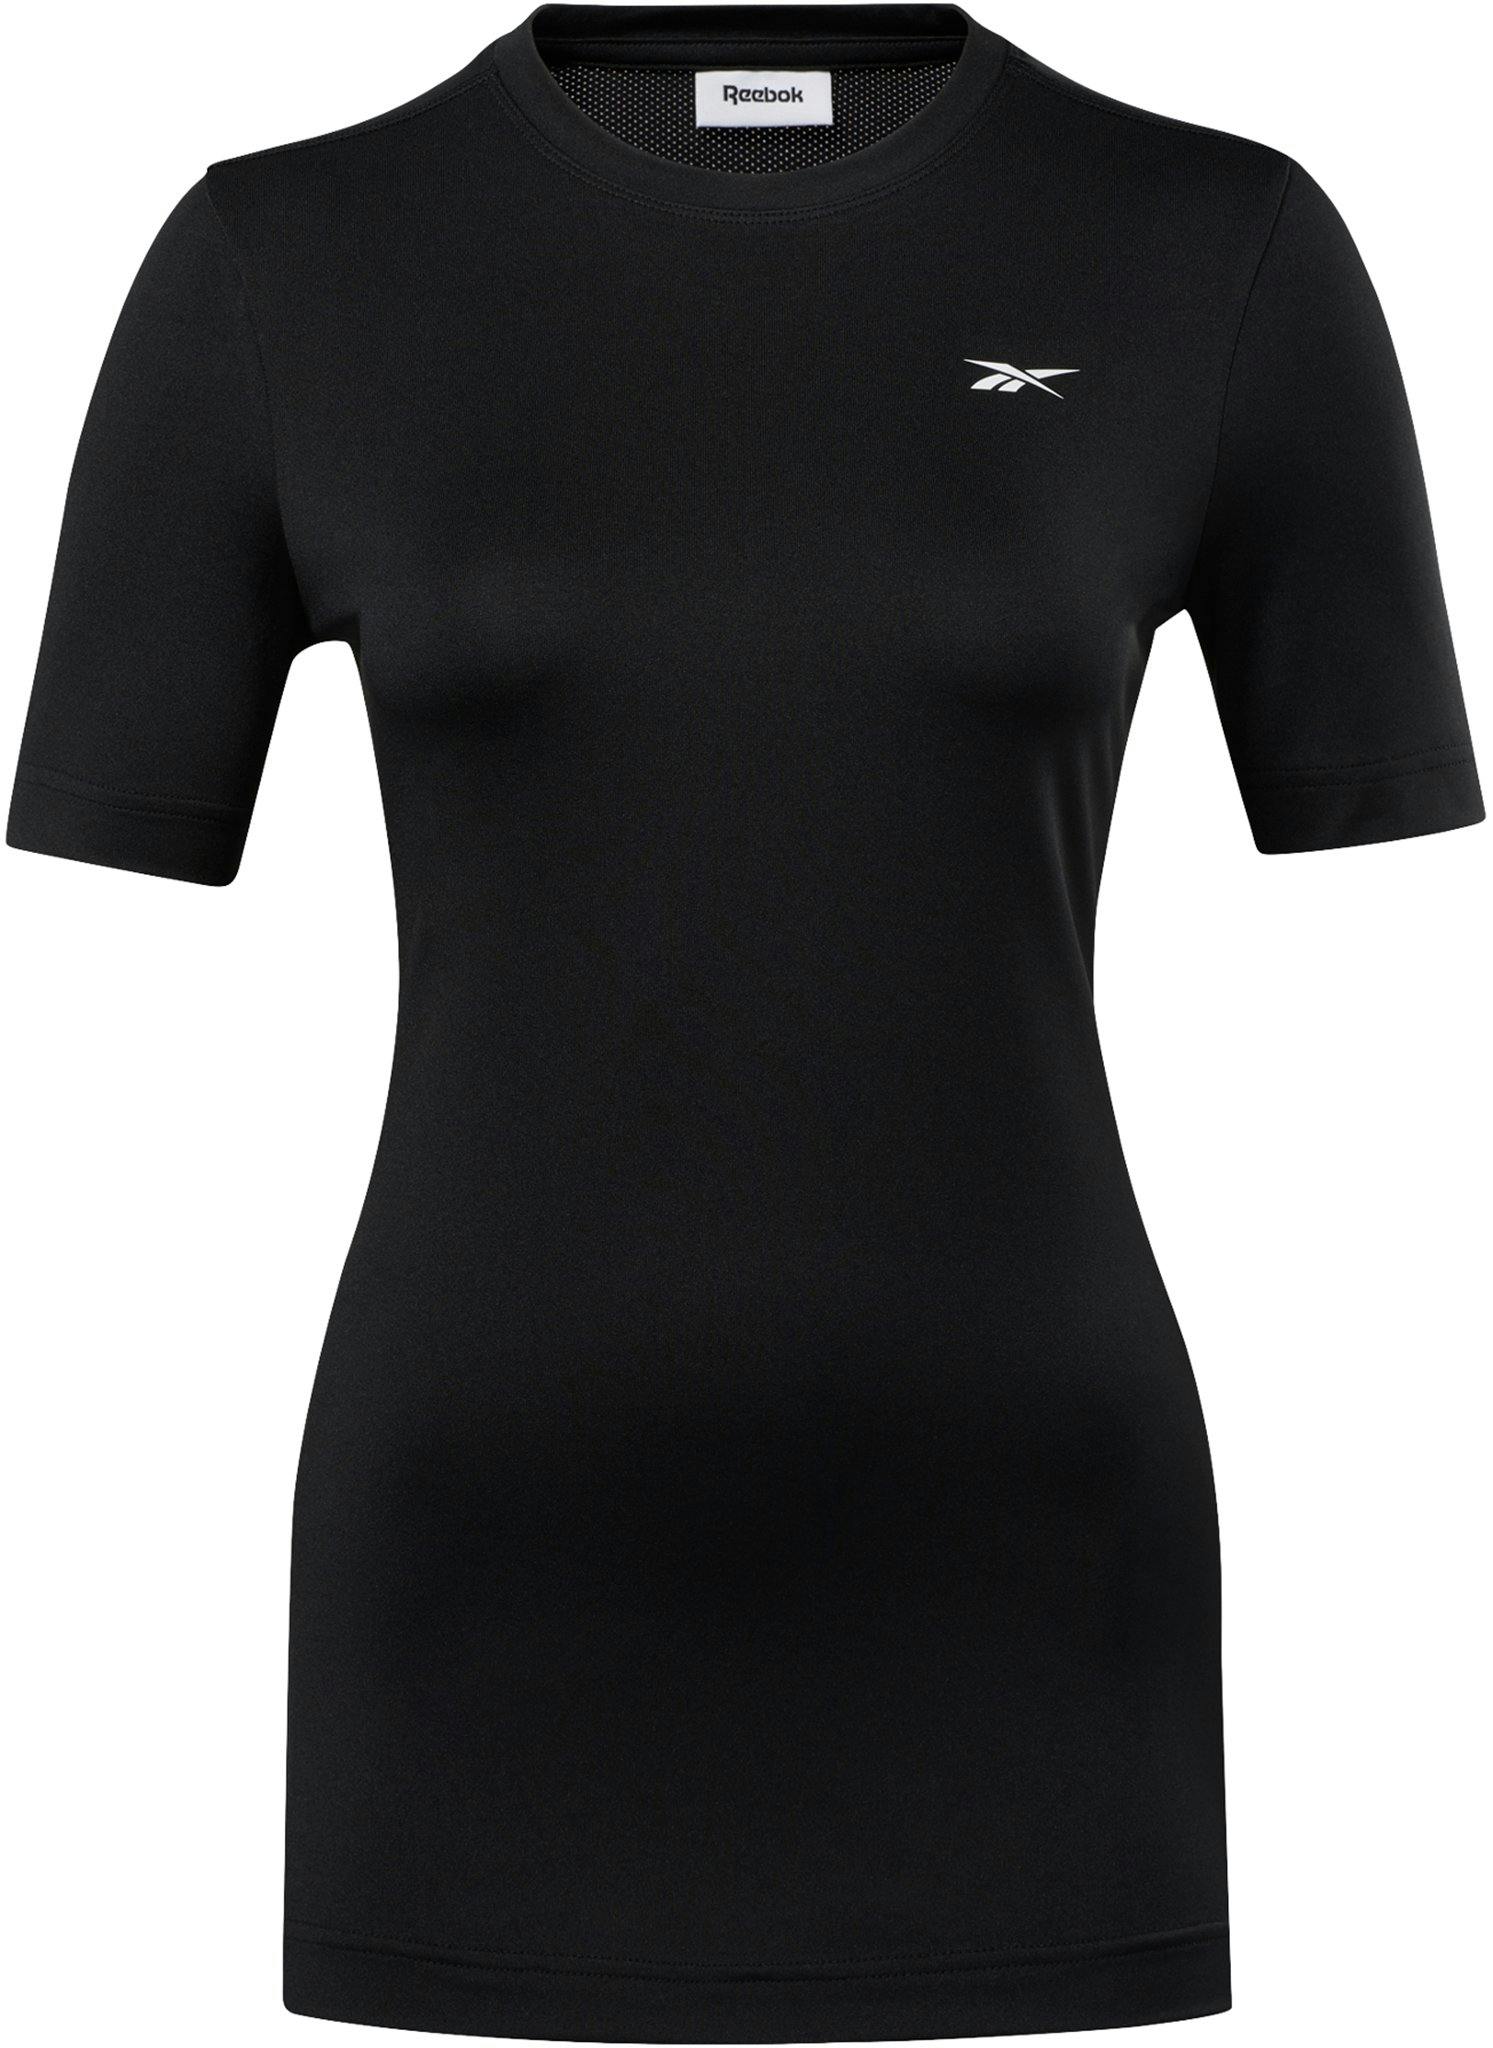 Product image for Workout Ready Supremium Tee - Women's